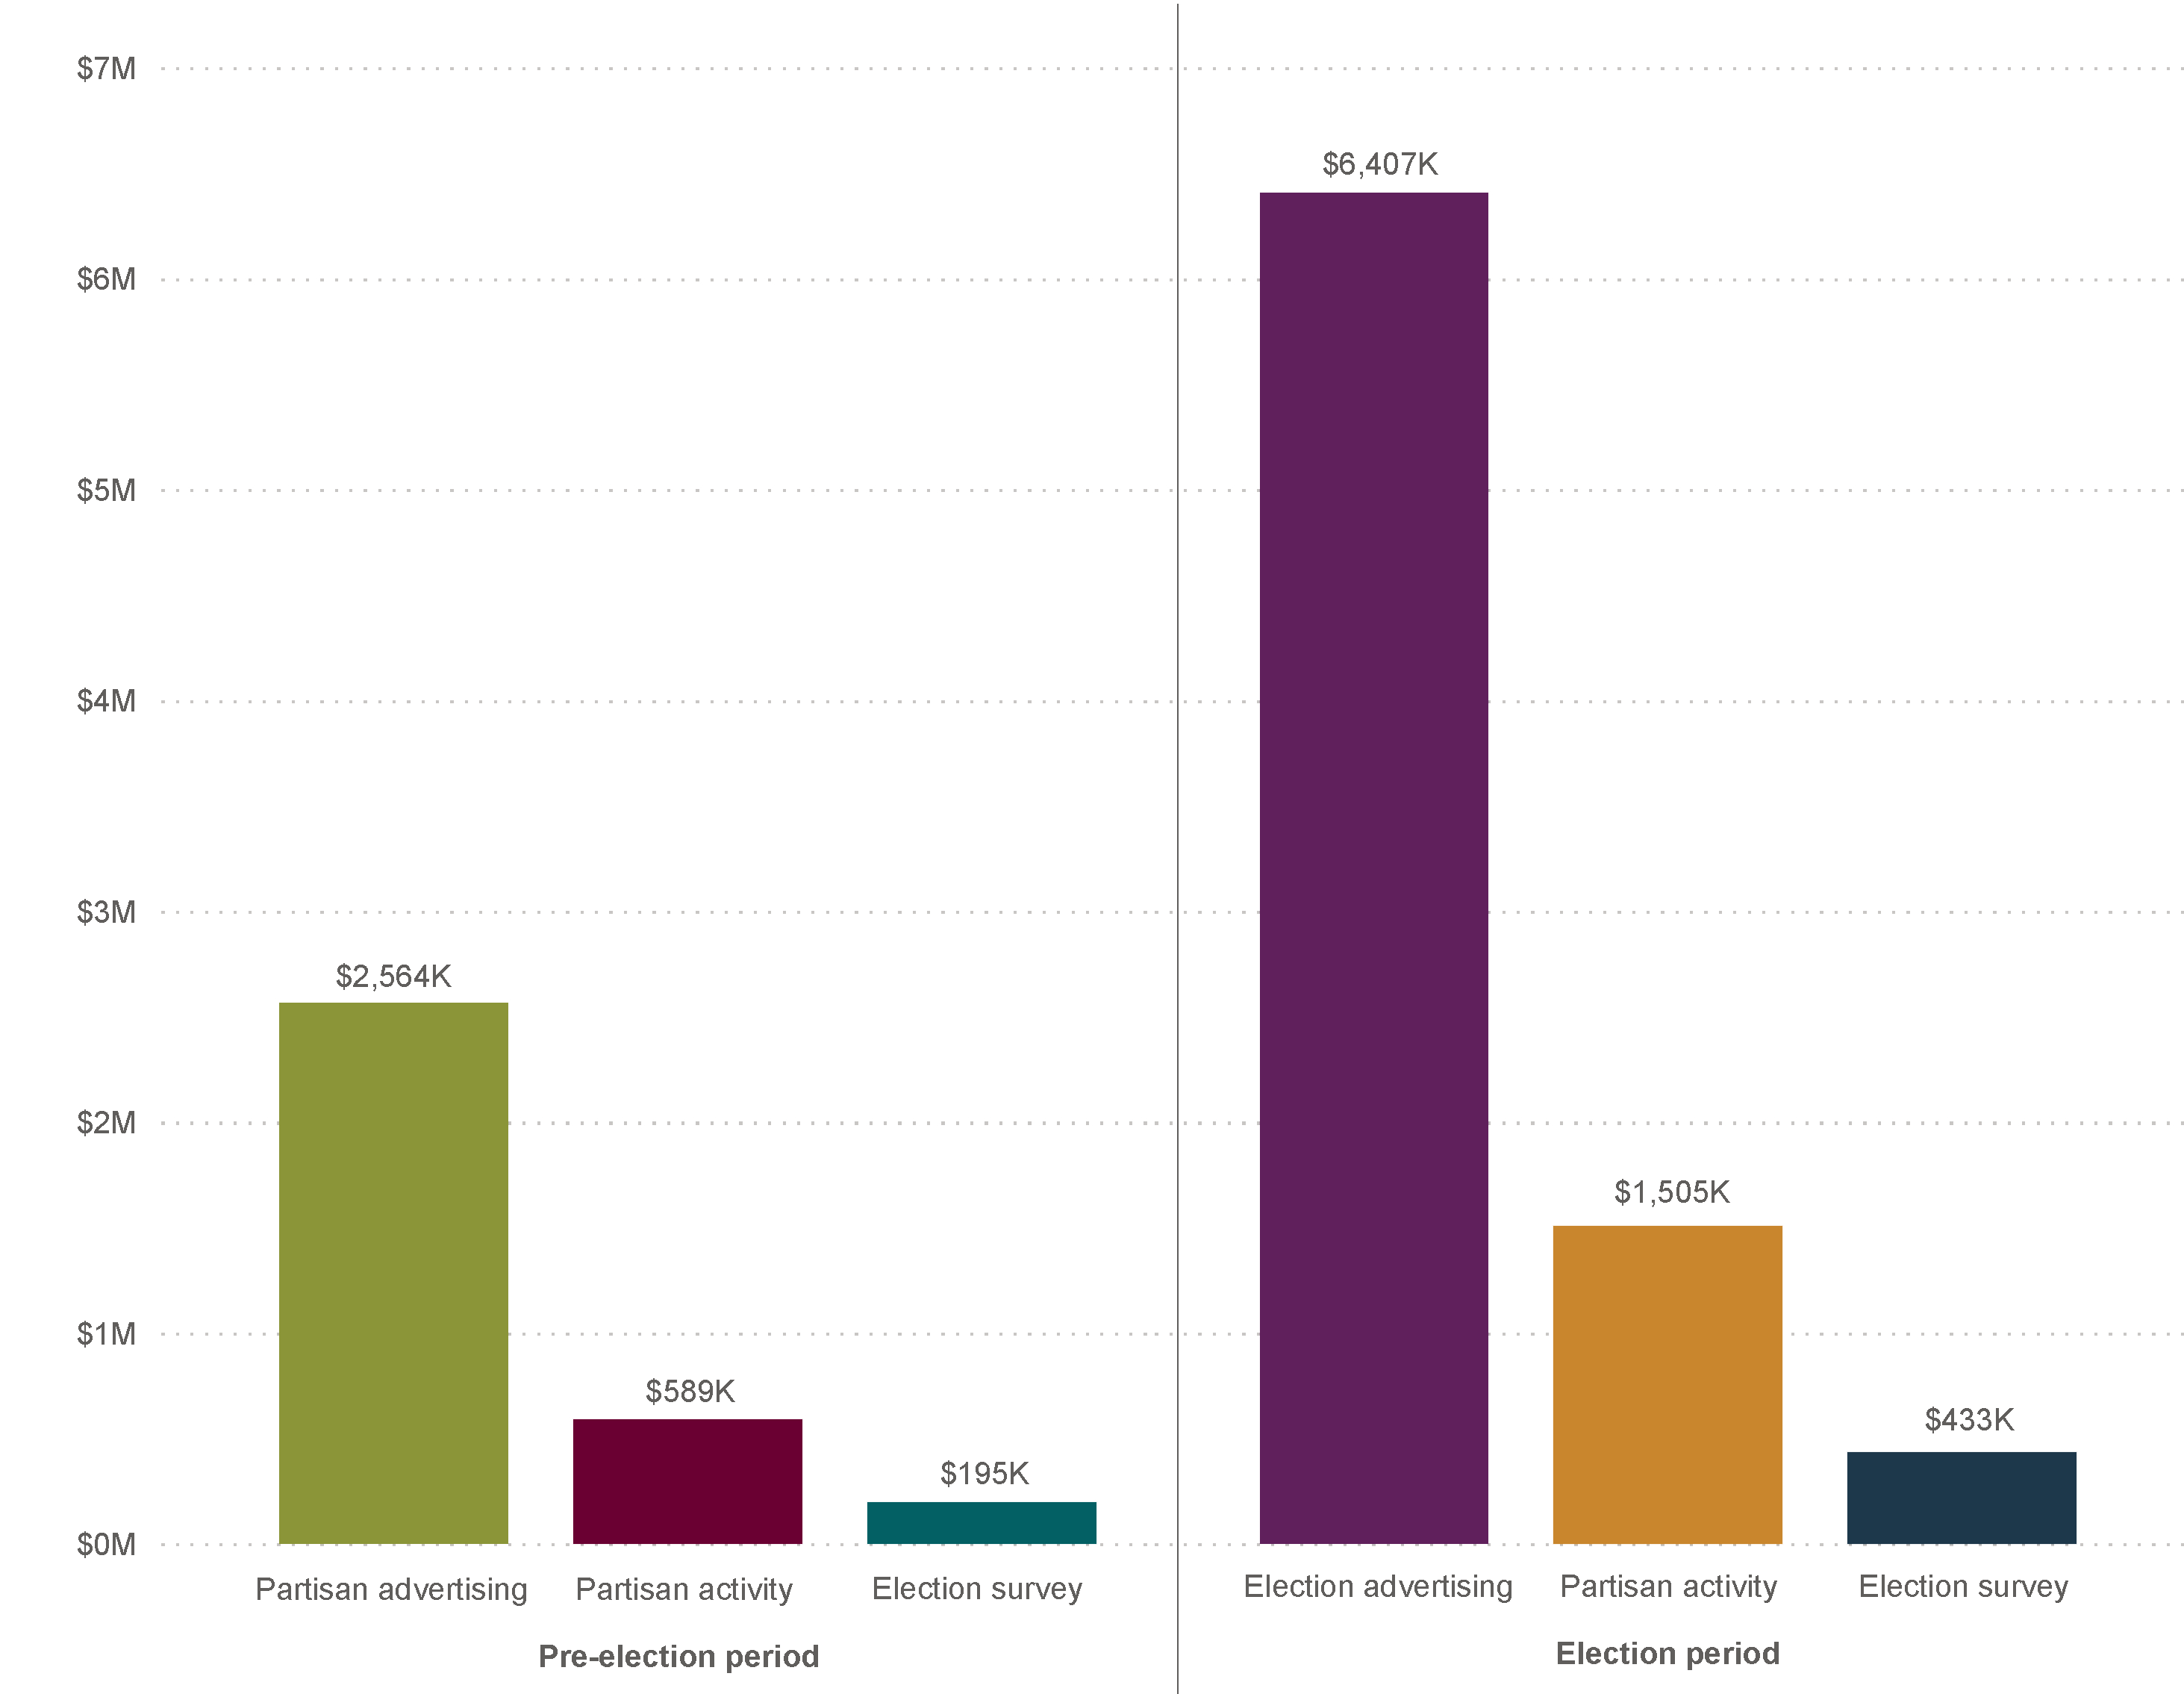 Figure 6 – Expenses by regulated activity at the 2019 general election (pre-election and election periods)